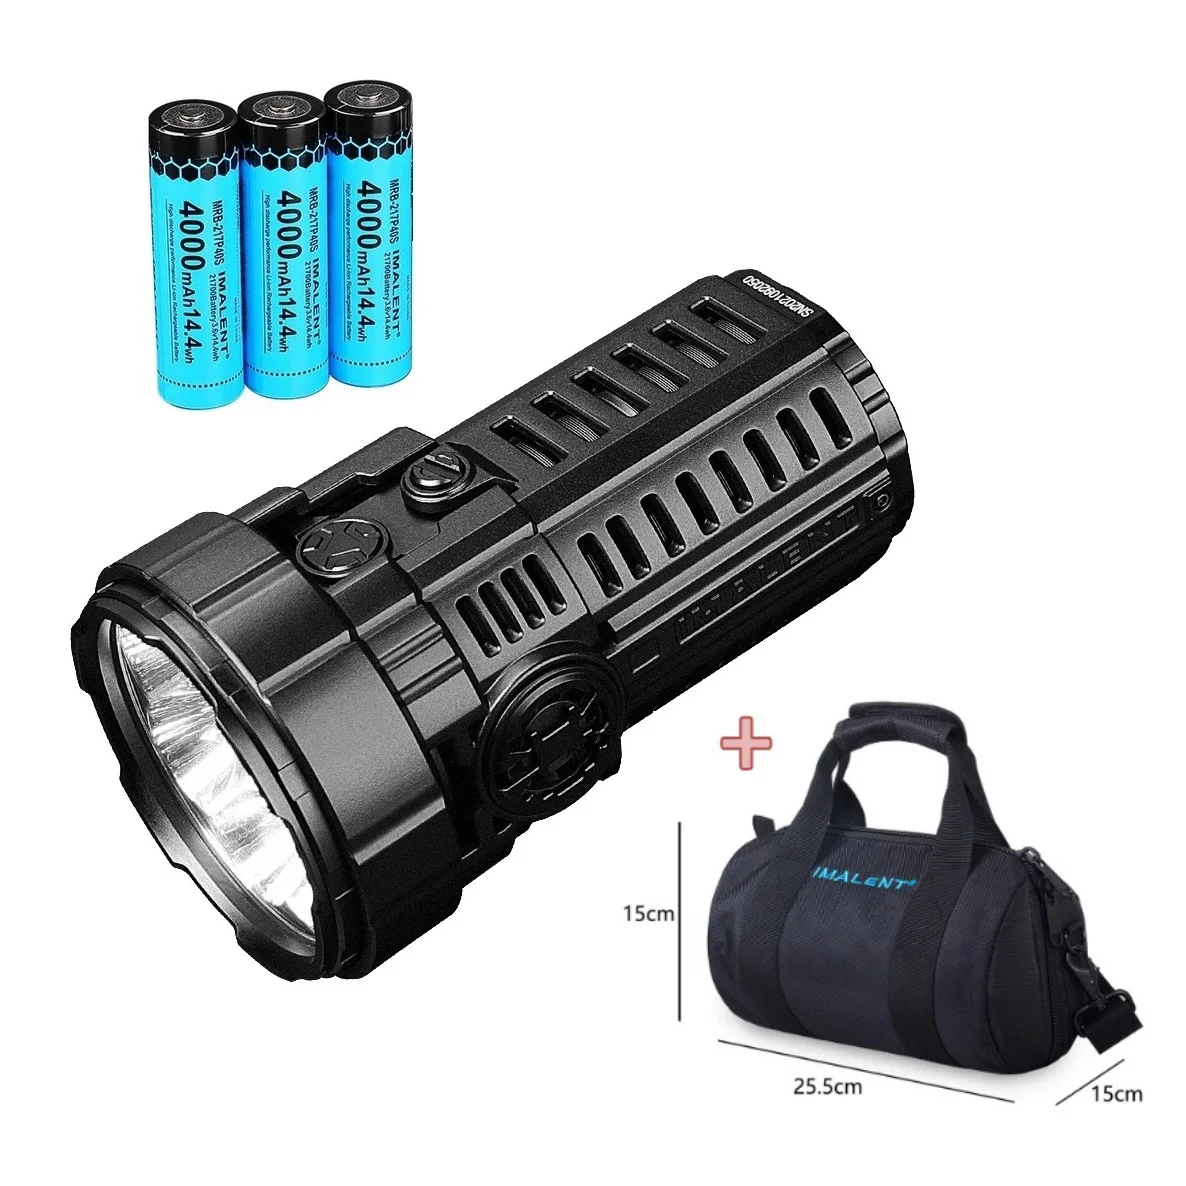 IMALENT MS08 High Power LED Flashlight CREE XHP70 34000LM Torch Light Rechargeable with 21700 Battery for Camping,Self Defense